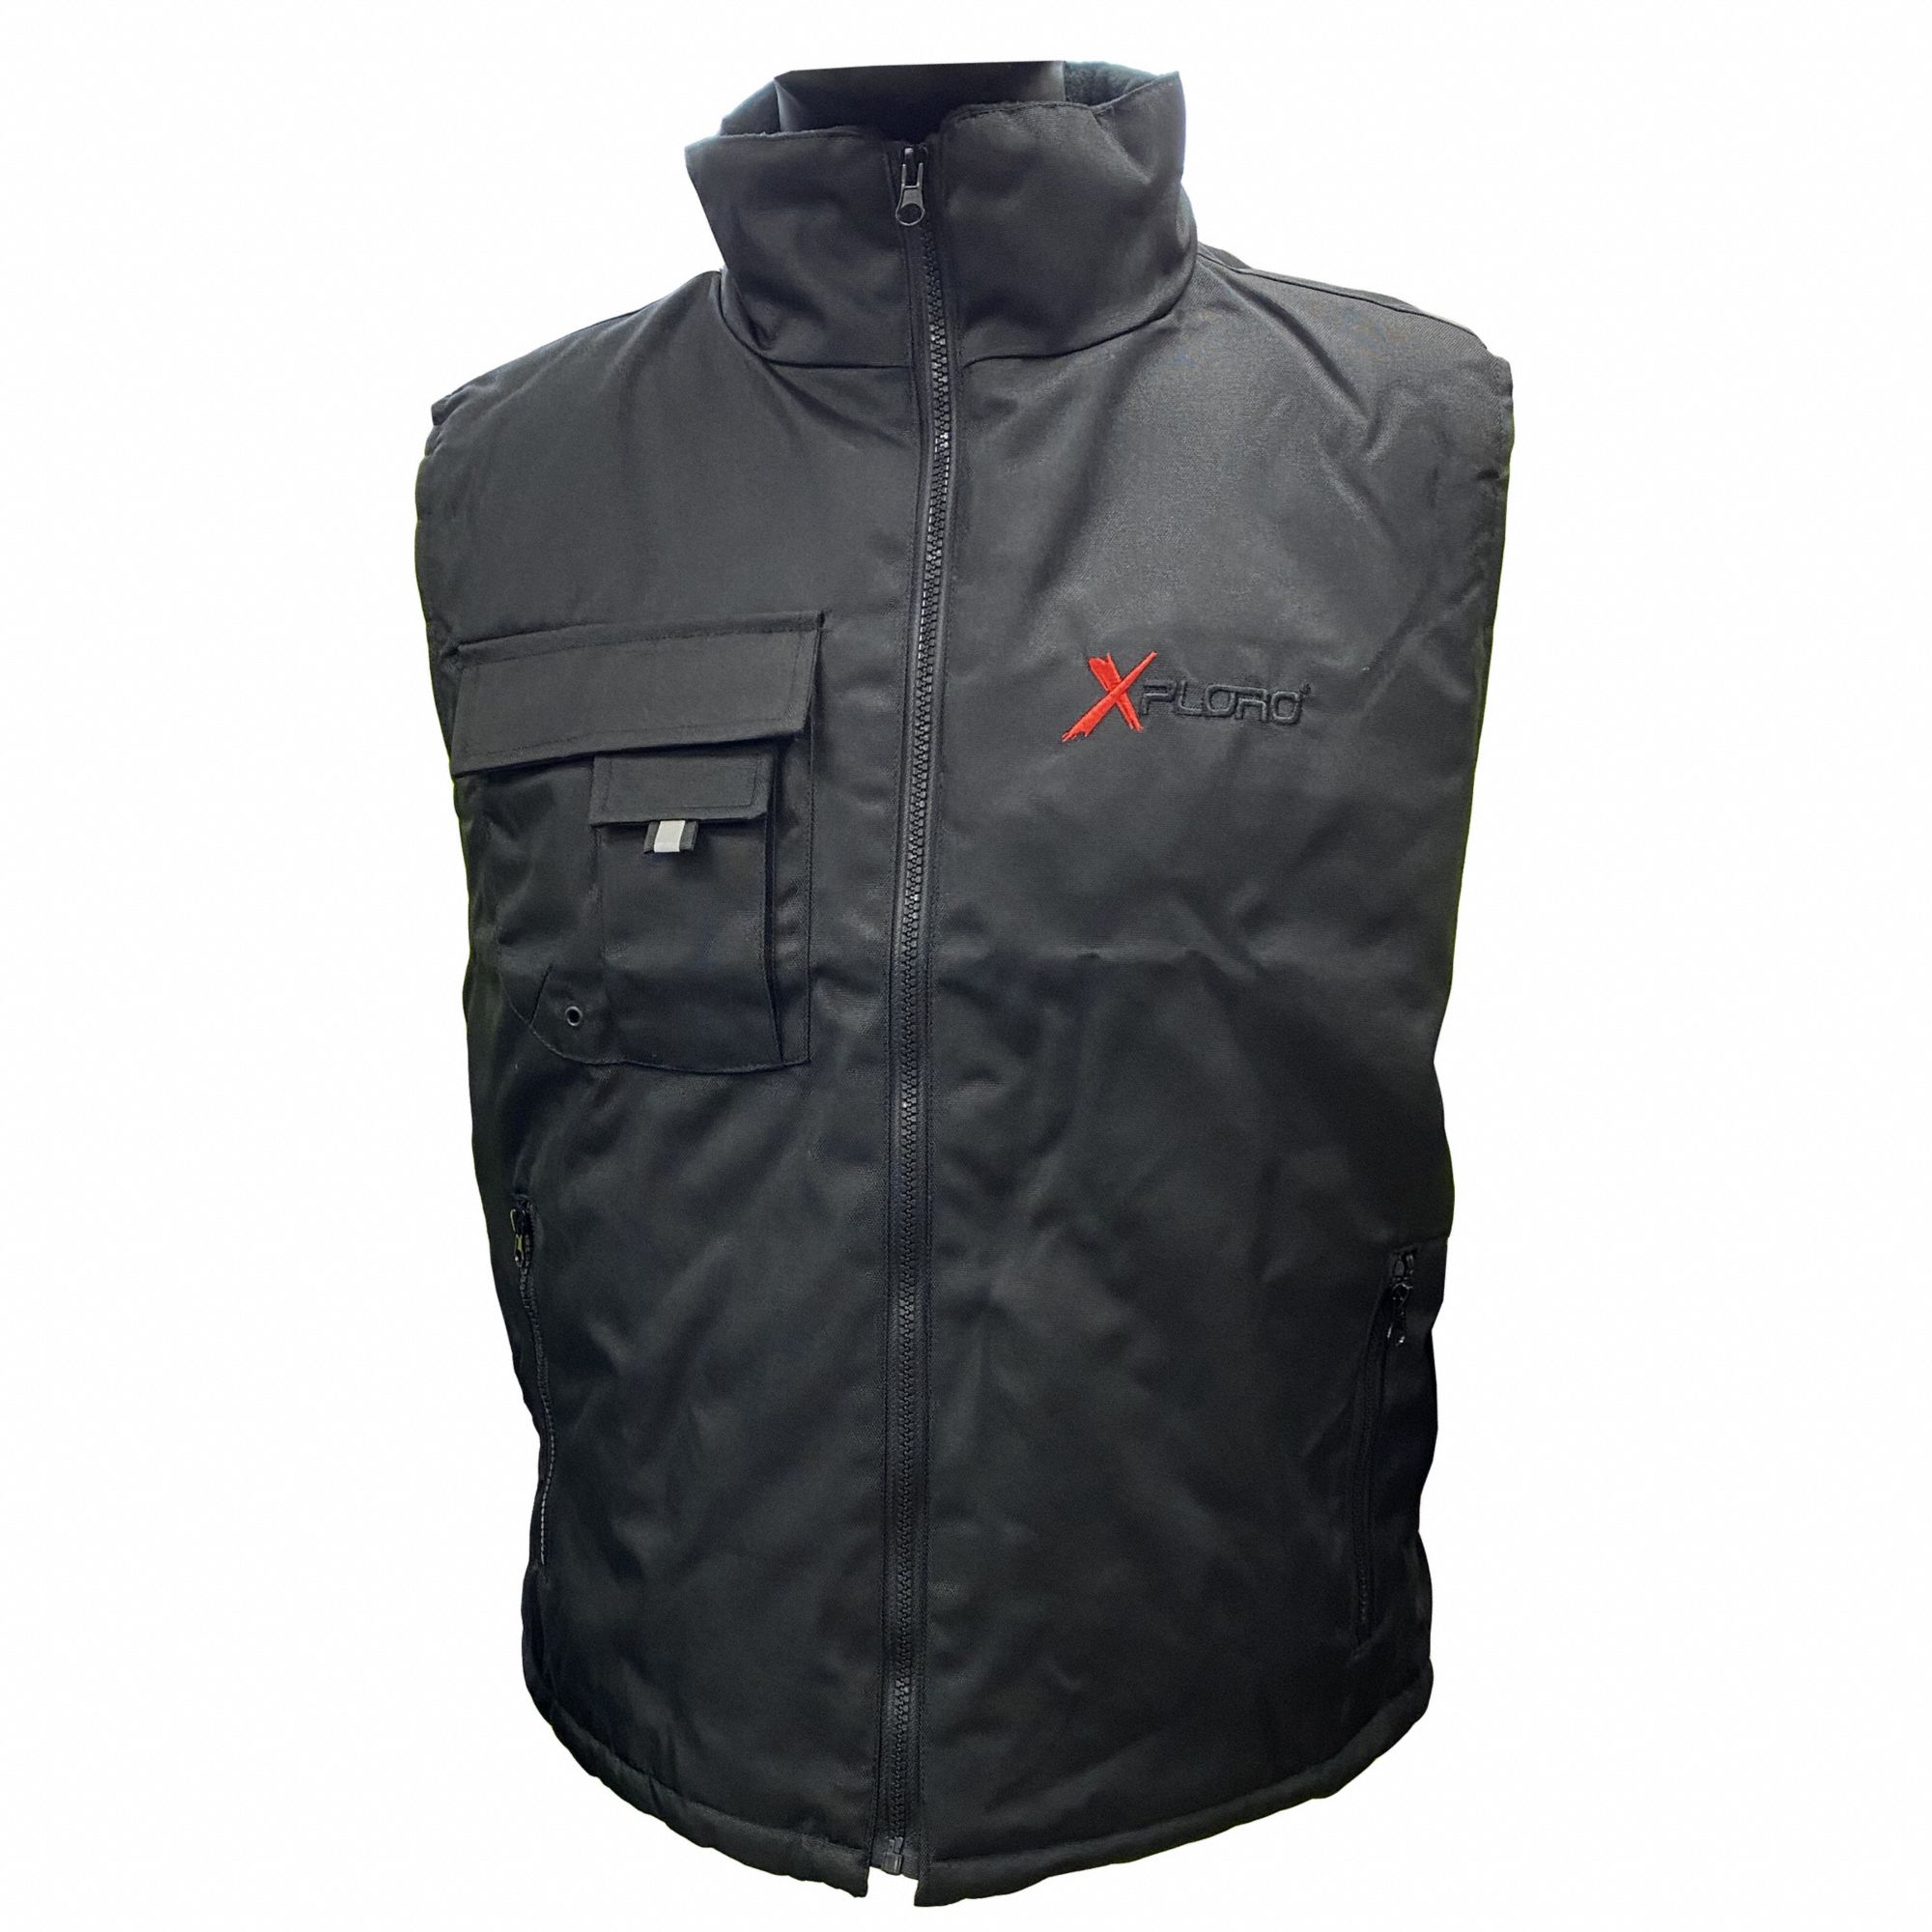 Insulated Vest: XL, 48 in Max Chest Size, 29 in Lg, Insulated for Cold Conditions, Nylon